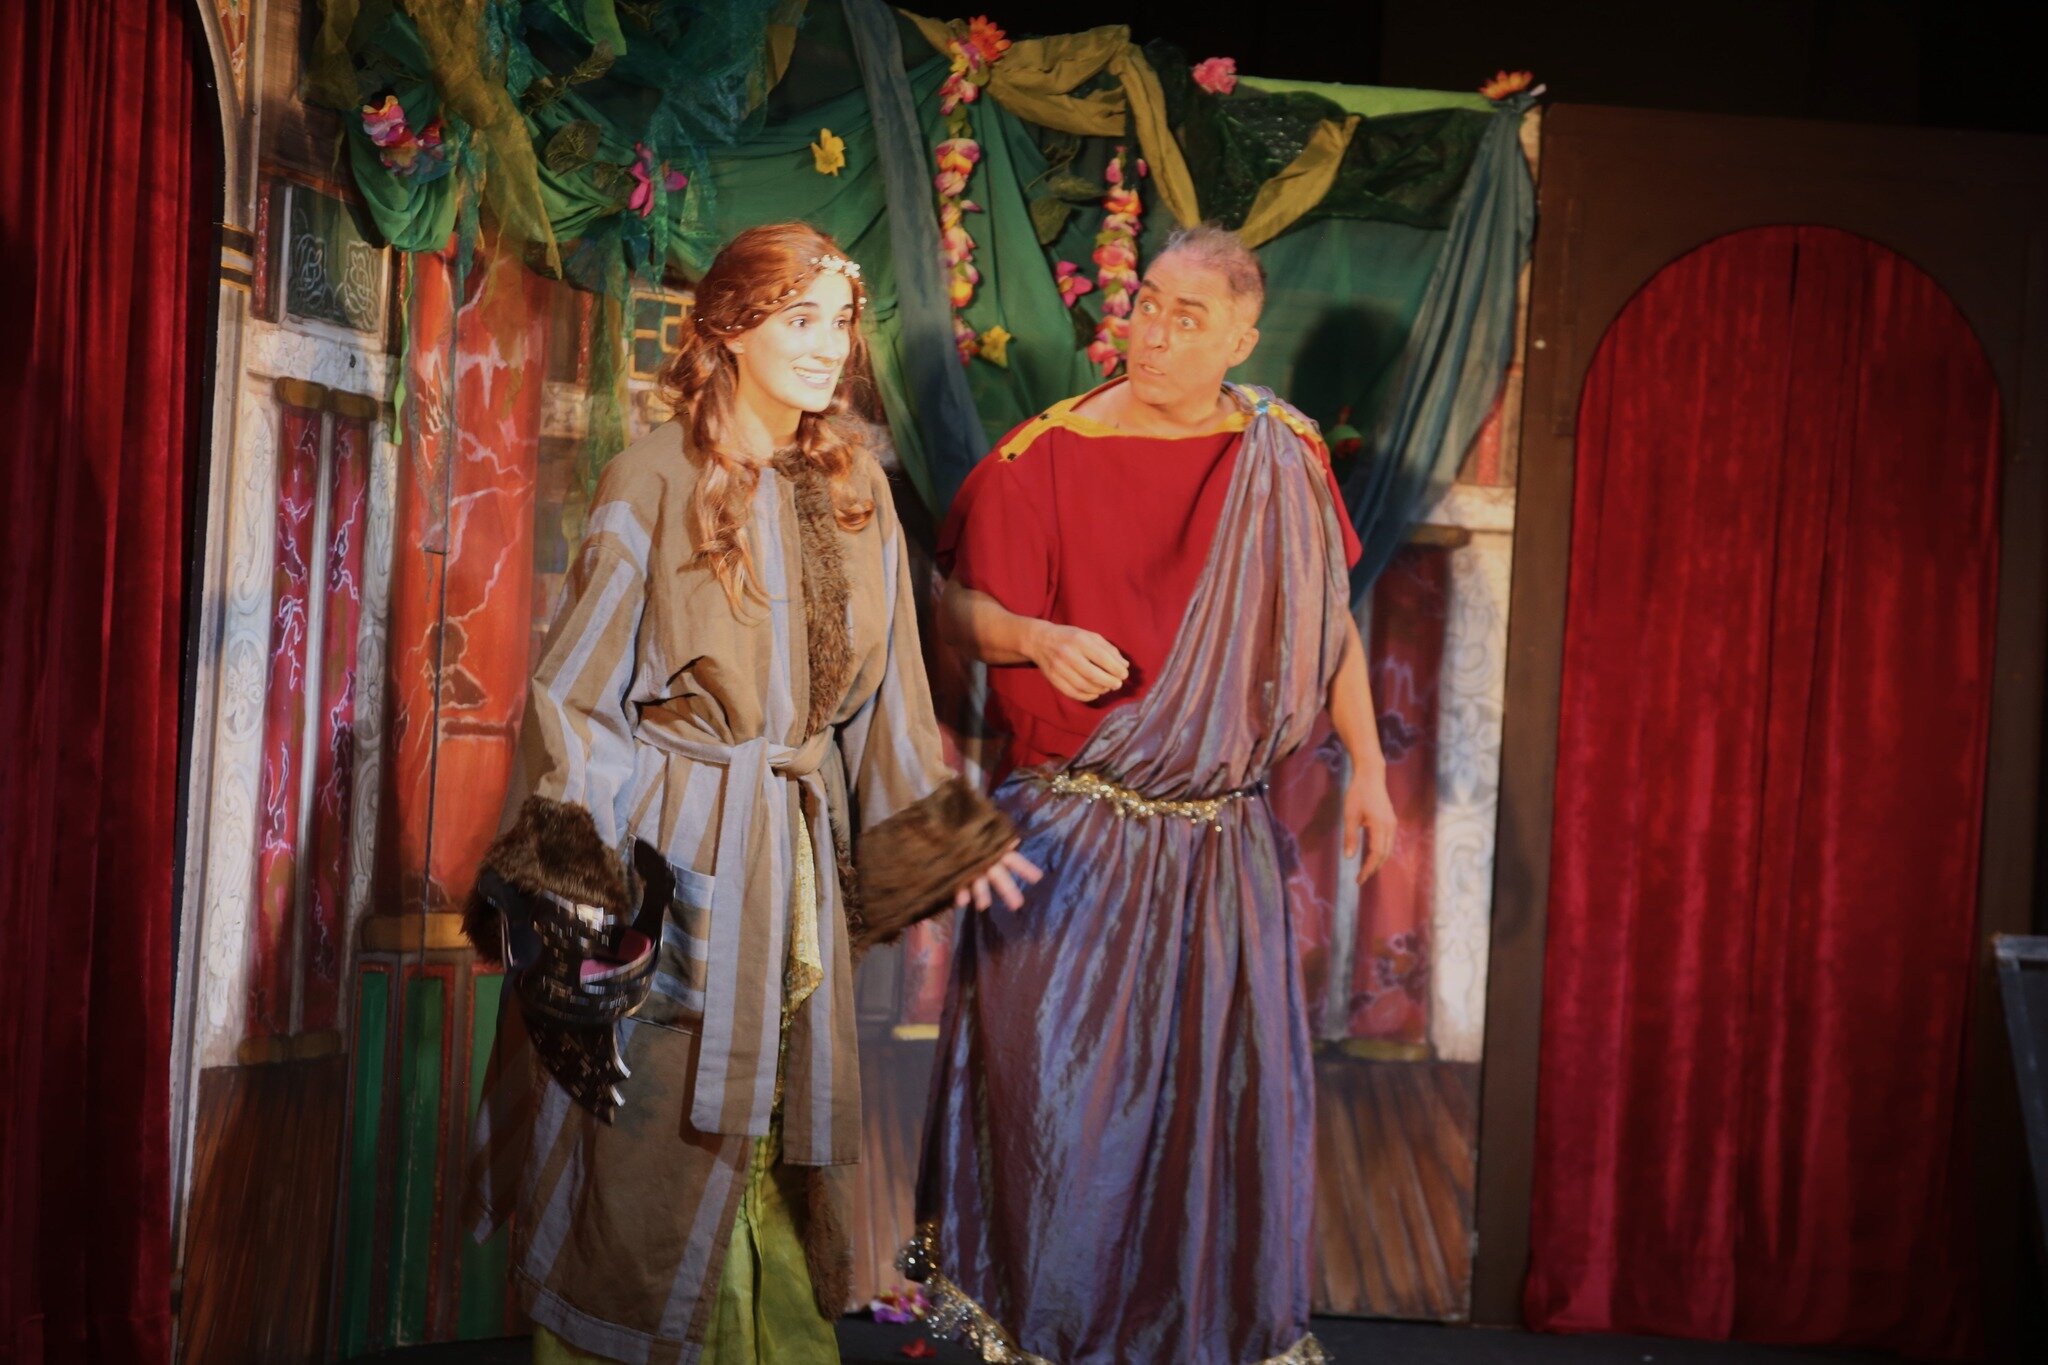 Shakespeare can't believe it! 'Her Ladyship' wants to see the play again... but shorter? 

 #educationaltheatre #childrenstheater #theatre #musicaltheater #childrenstheatre #educationaltheater #teatroeducativo #performingarts #theatreineducation #mus